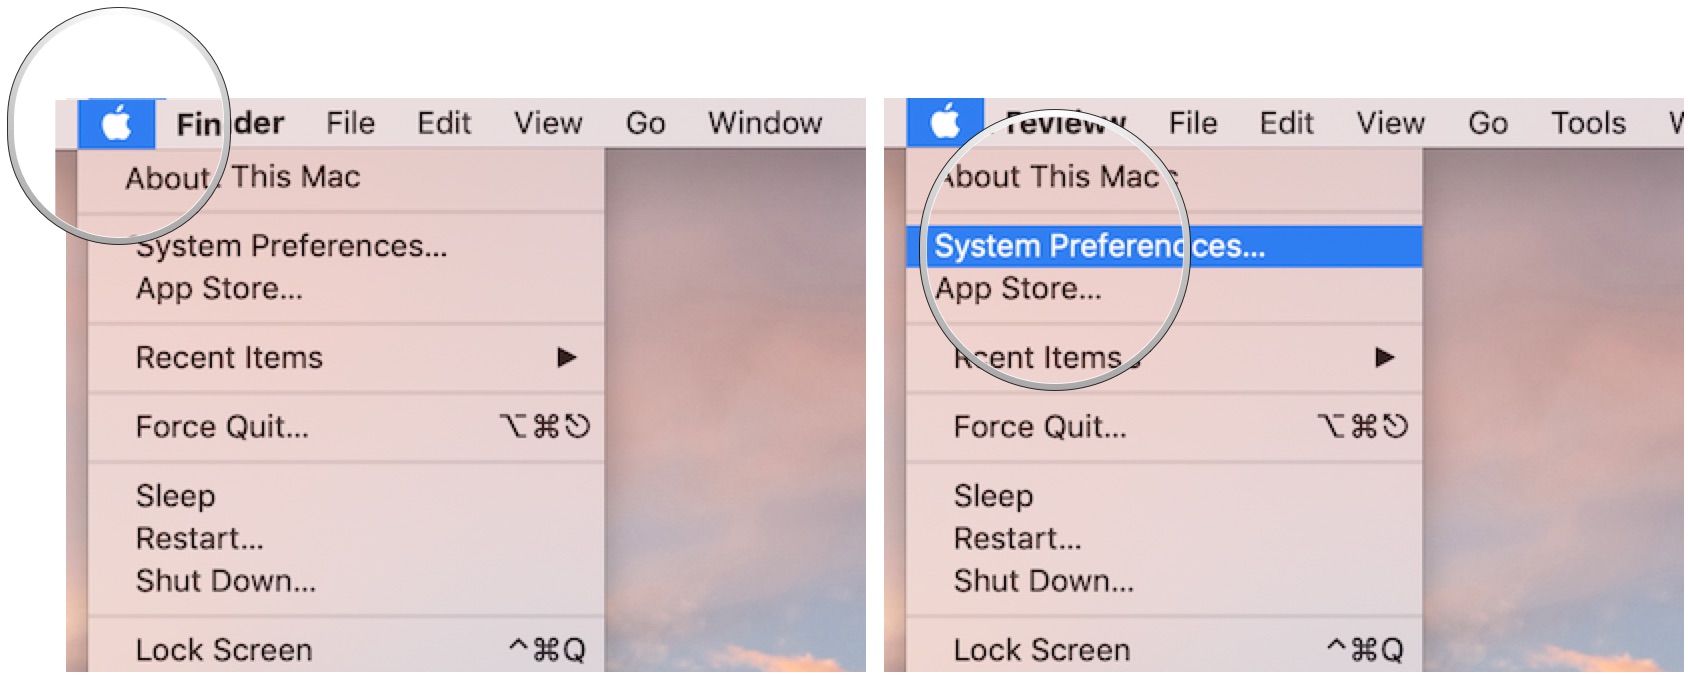 To enable Auto Unlock, click on the Apple icon, then select System Preferences